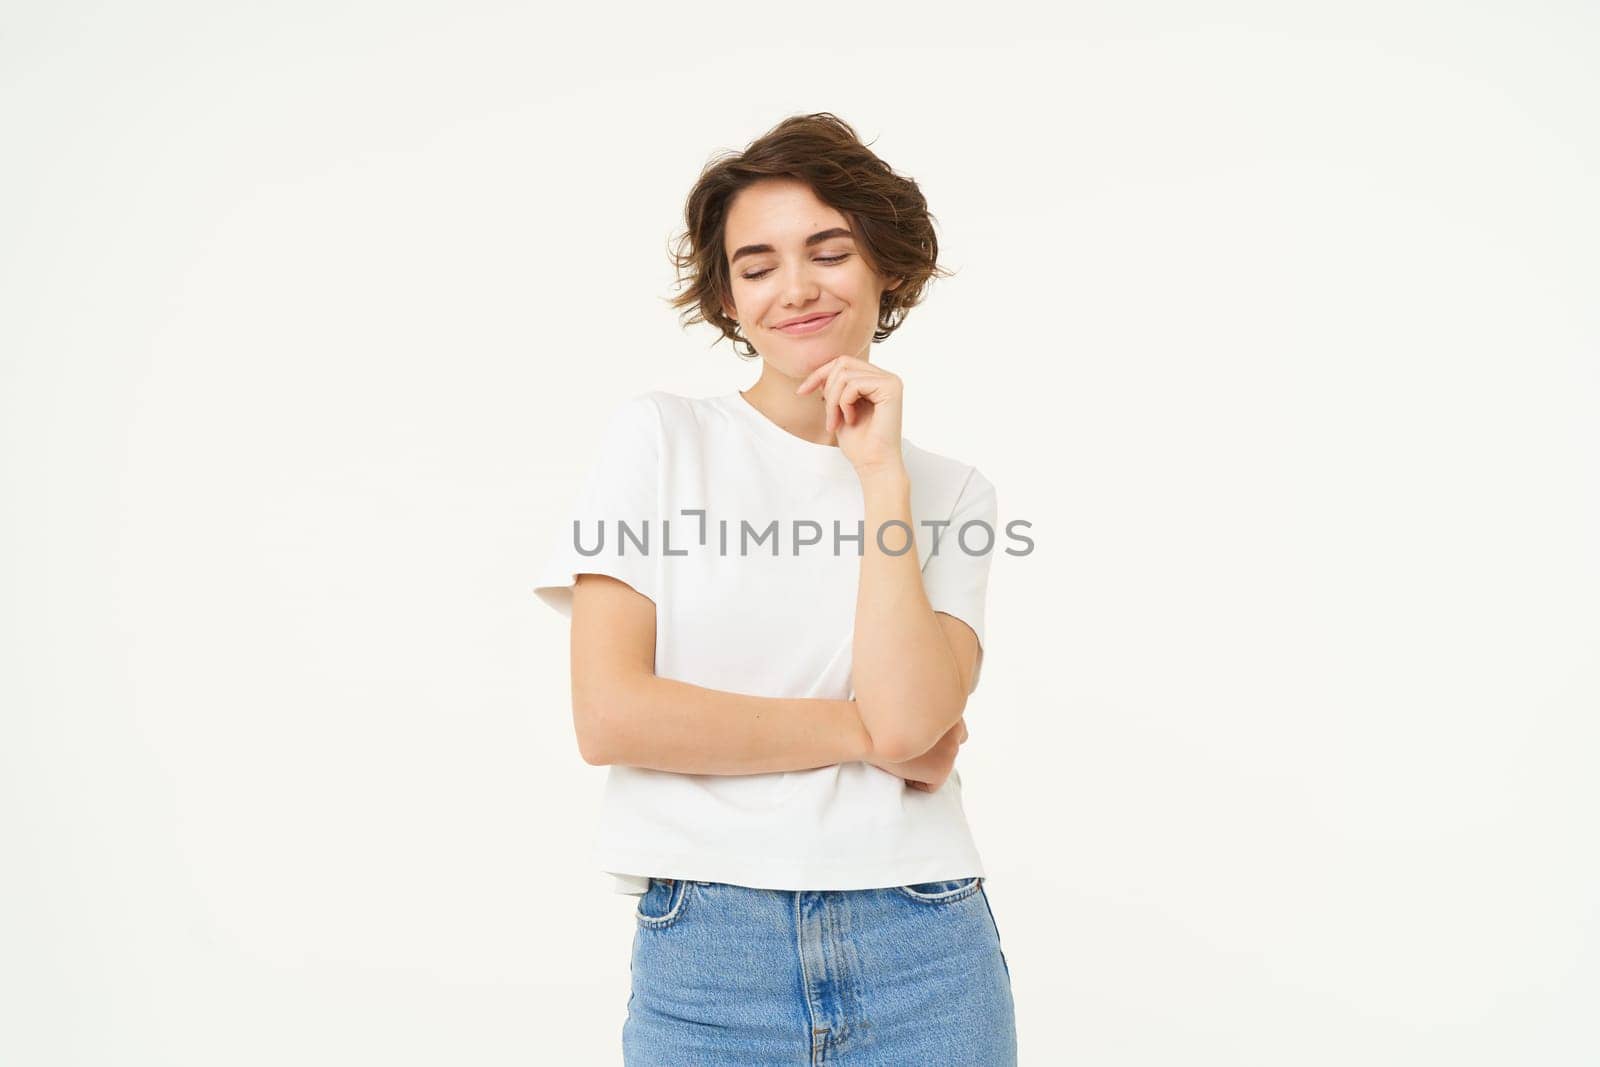 Image of pleased smiling brunette girl, smirks, looks down with confident, satisfied face expression, stands over white background.